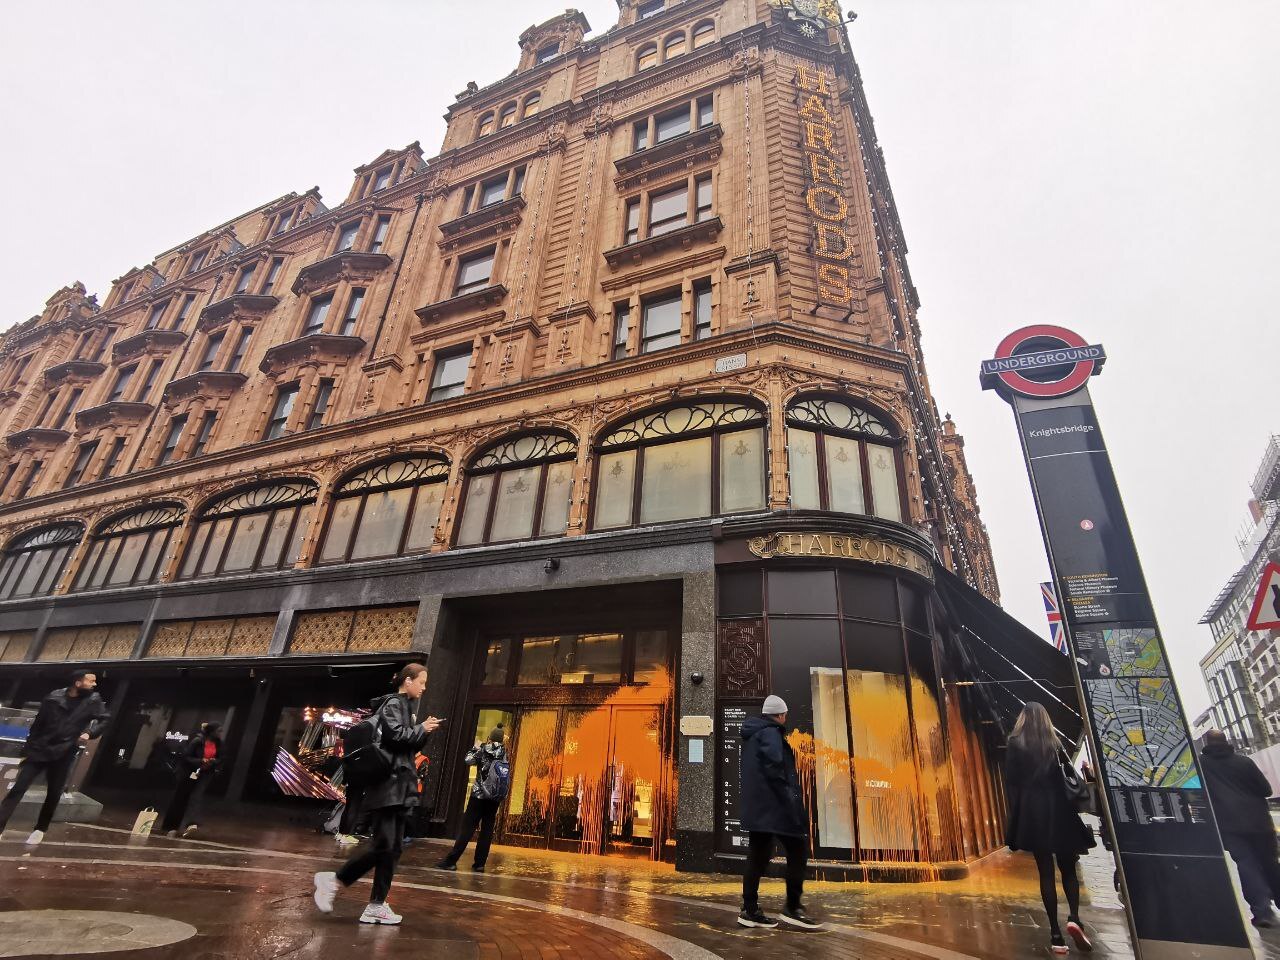 Harrods targeted by Just Stop Oil in latest protest